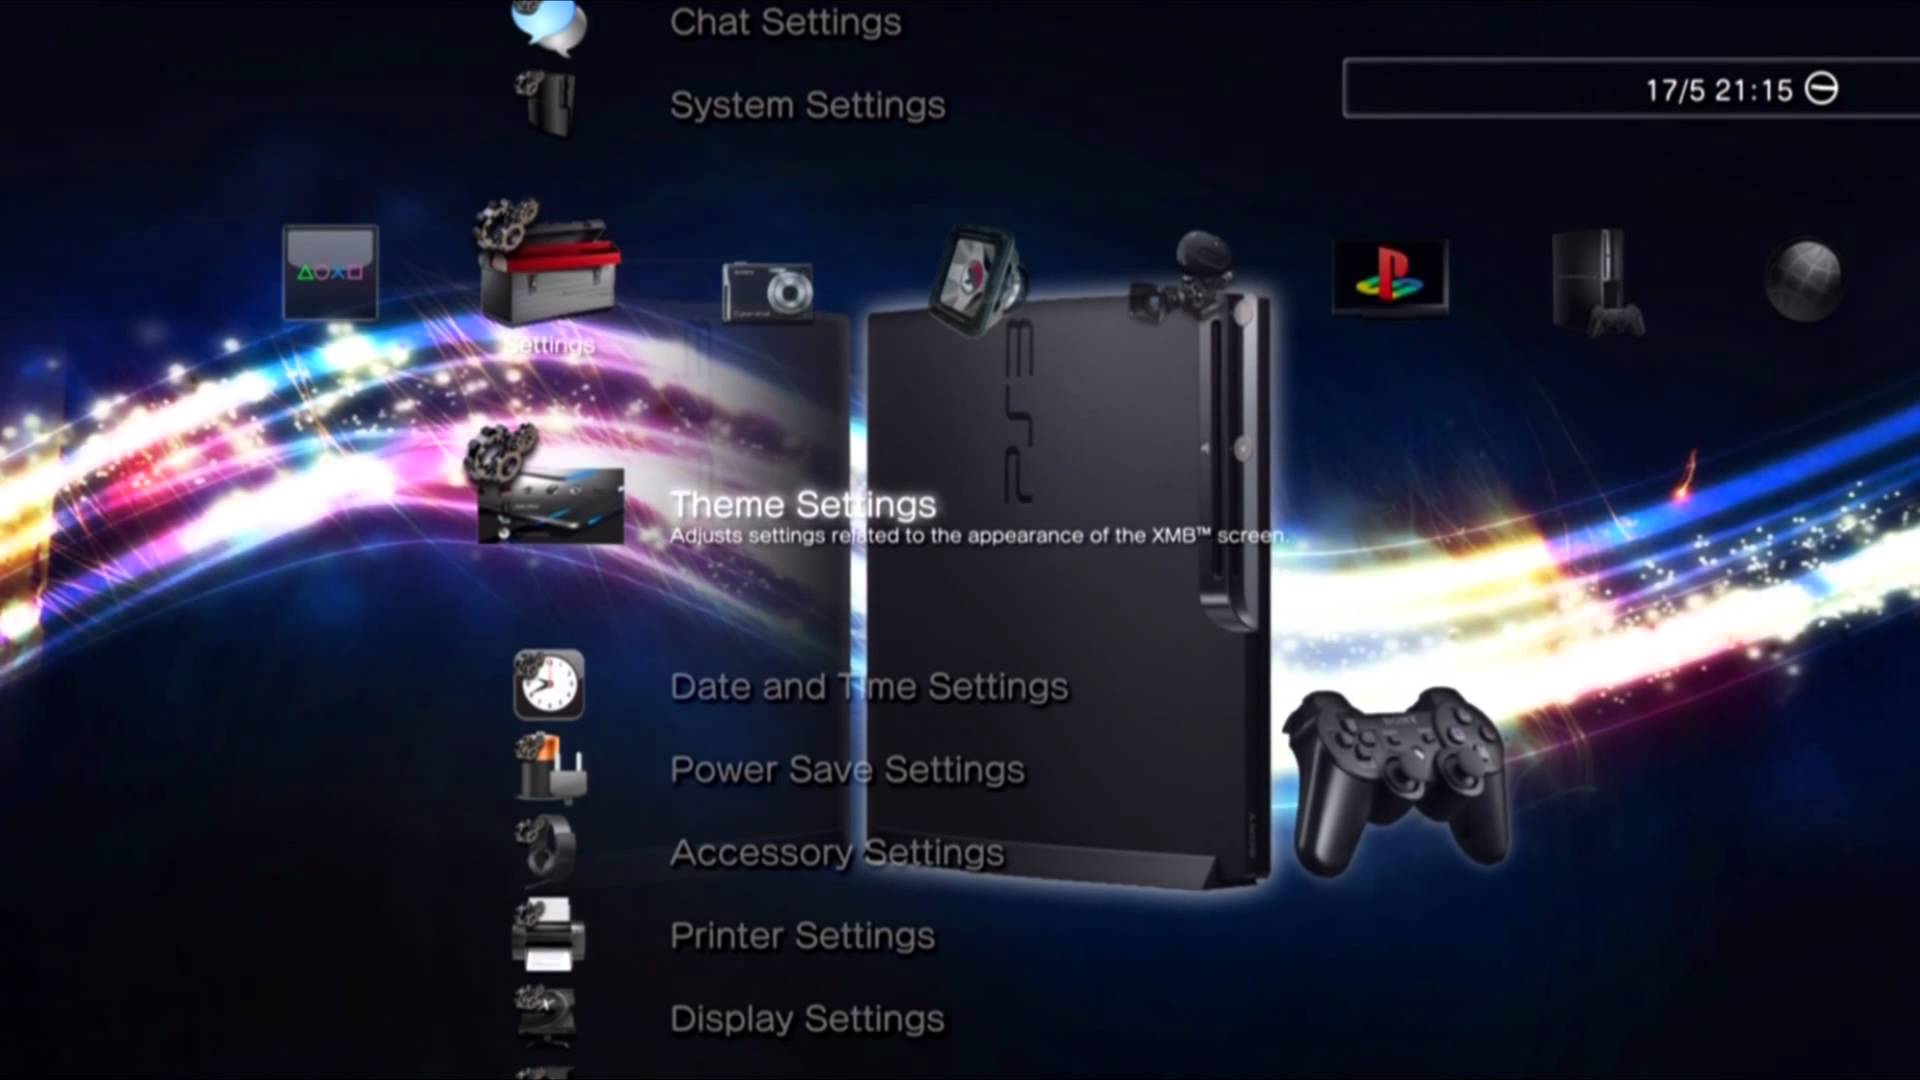 Ps3 Background Themes Images amp Pictures   Becuo